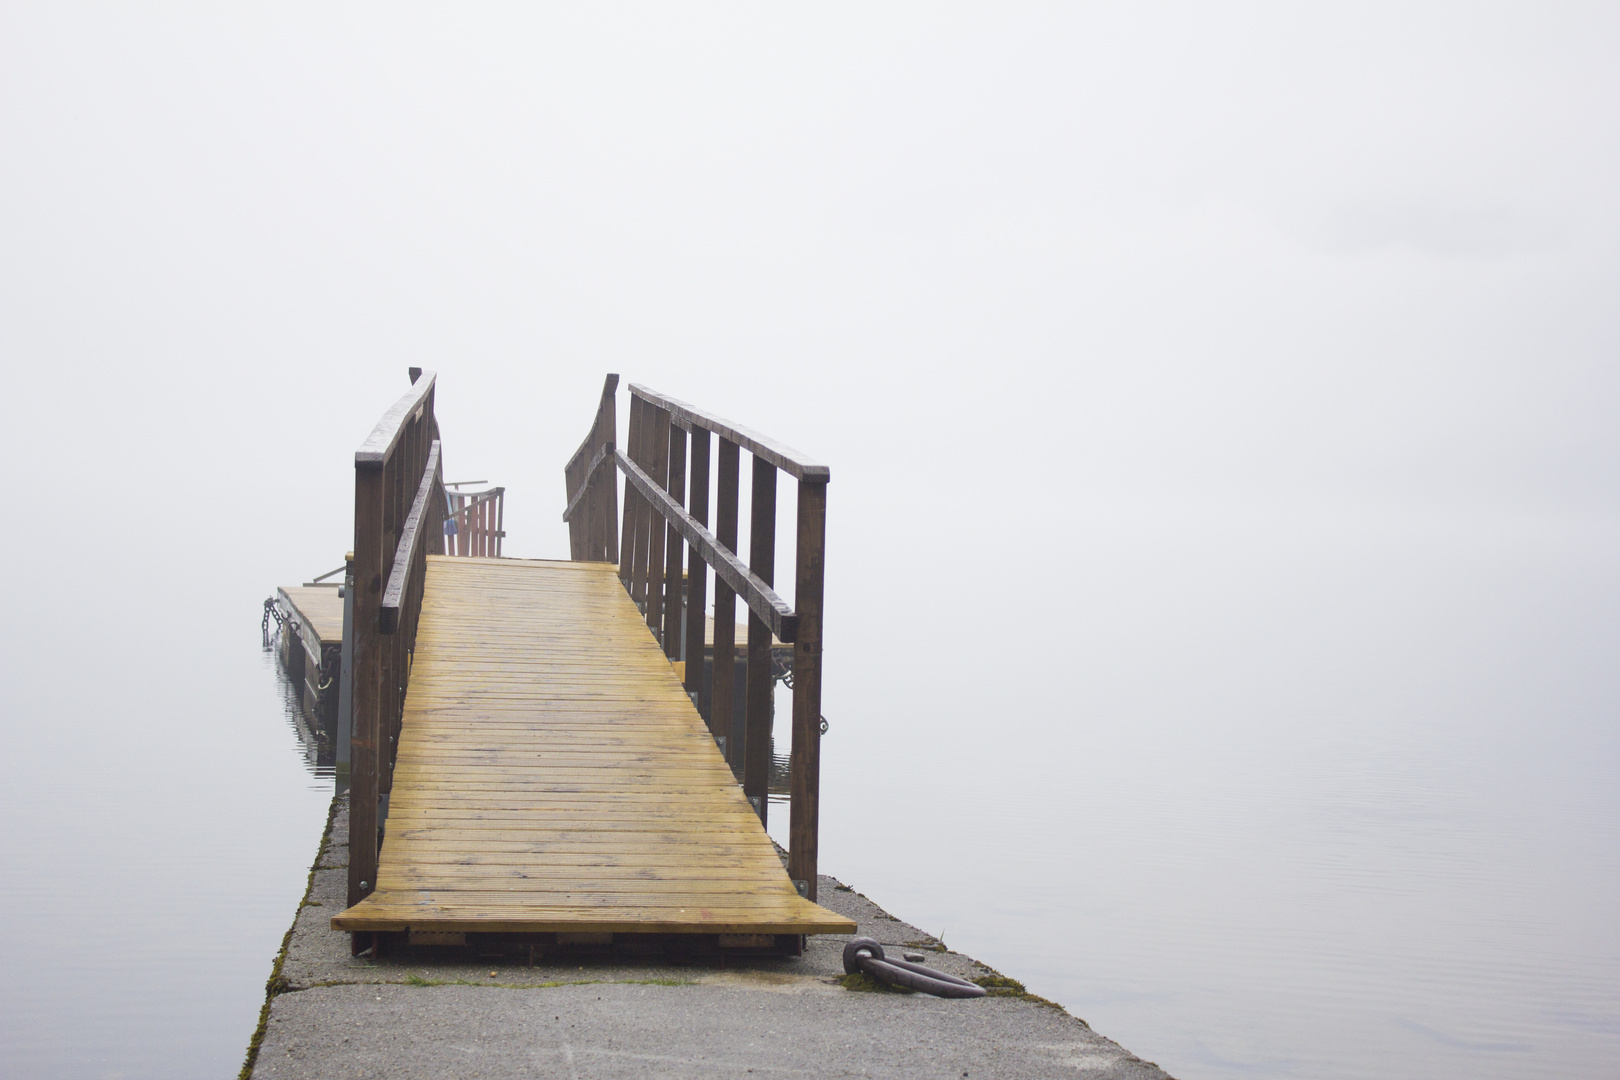 Jetty into Nothingness